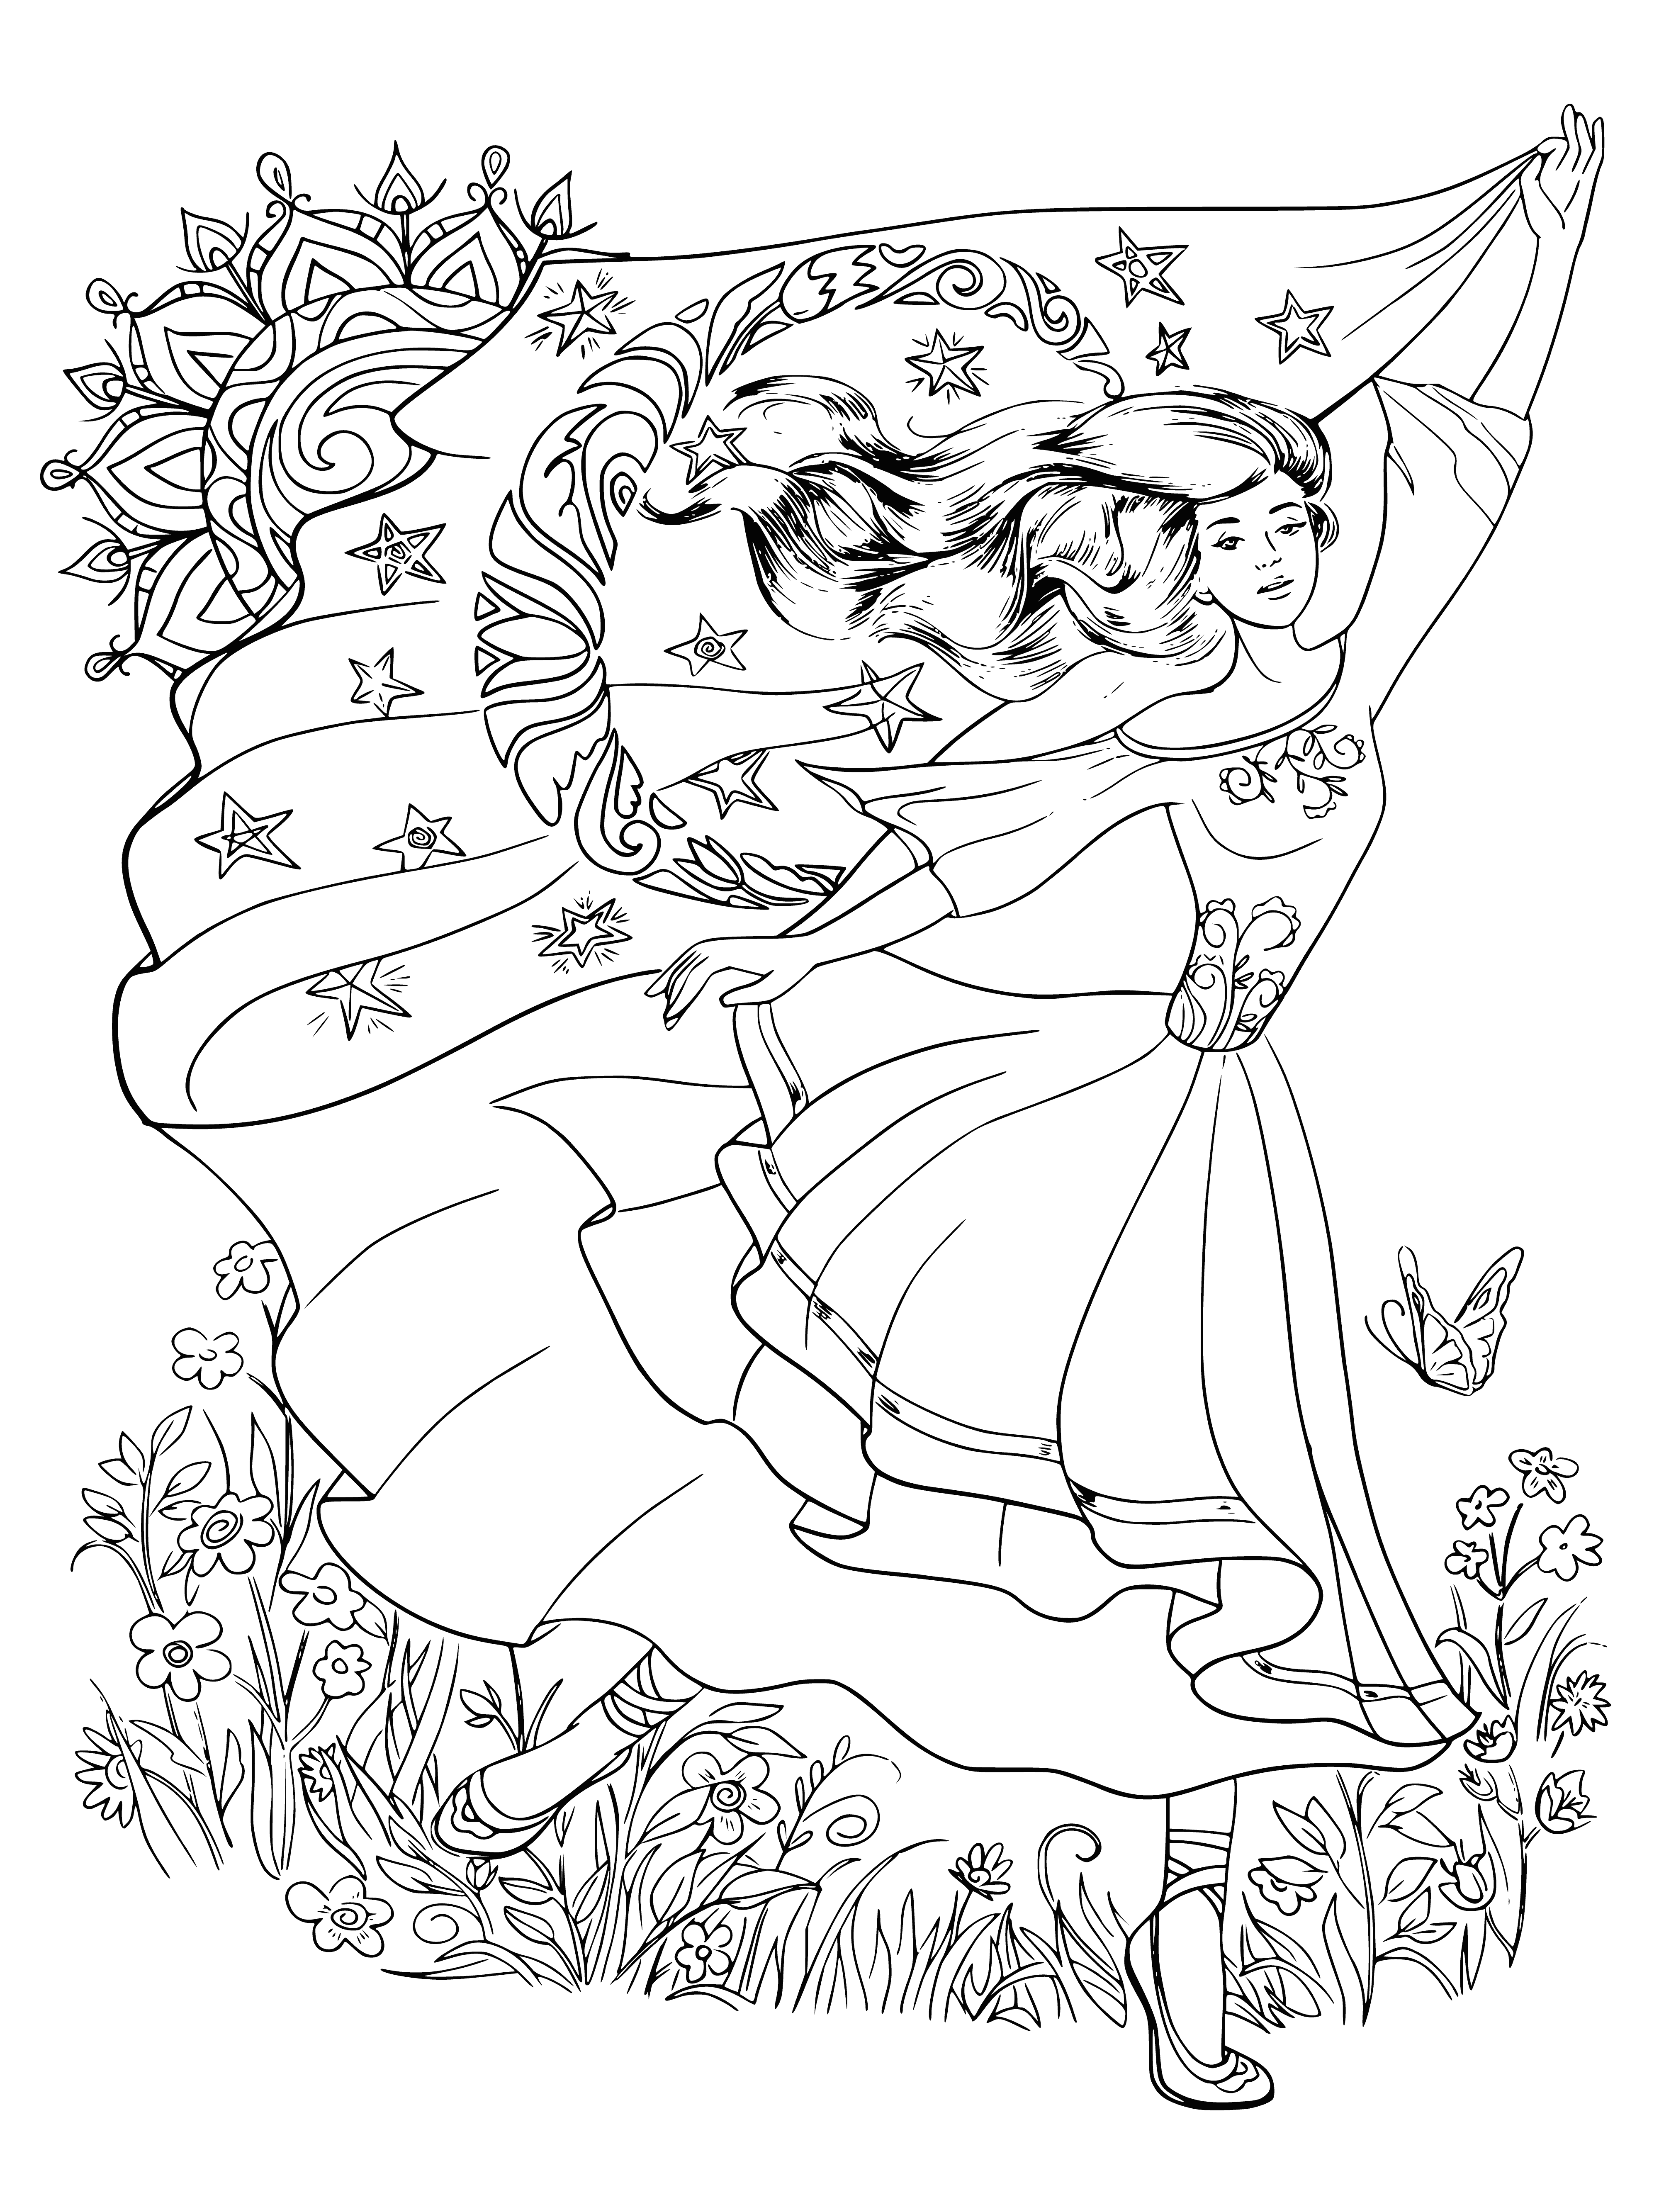 coloring page: Girl sits in lotus position surrounded by sun/moon, hands in lap eyes closed, deep in thought. Sun/moon intricate patterns, hair blowing in breeze.